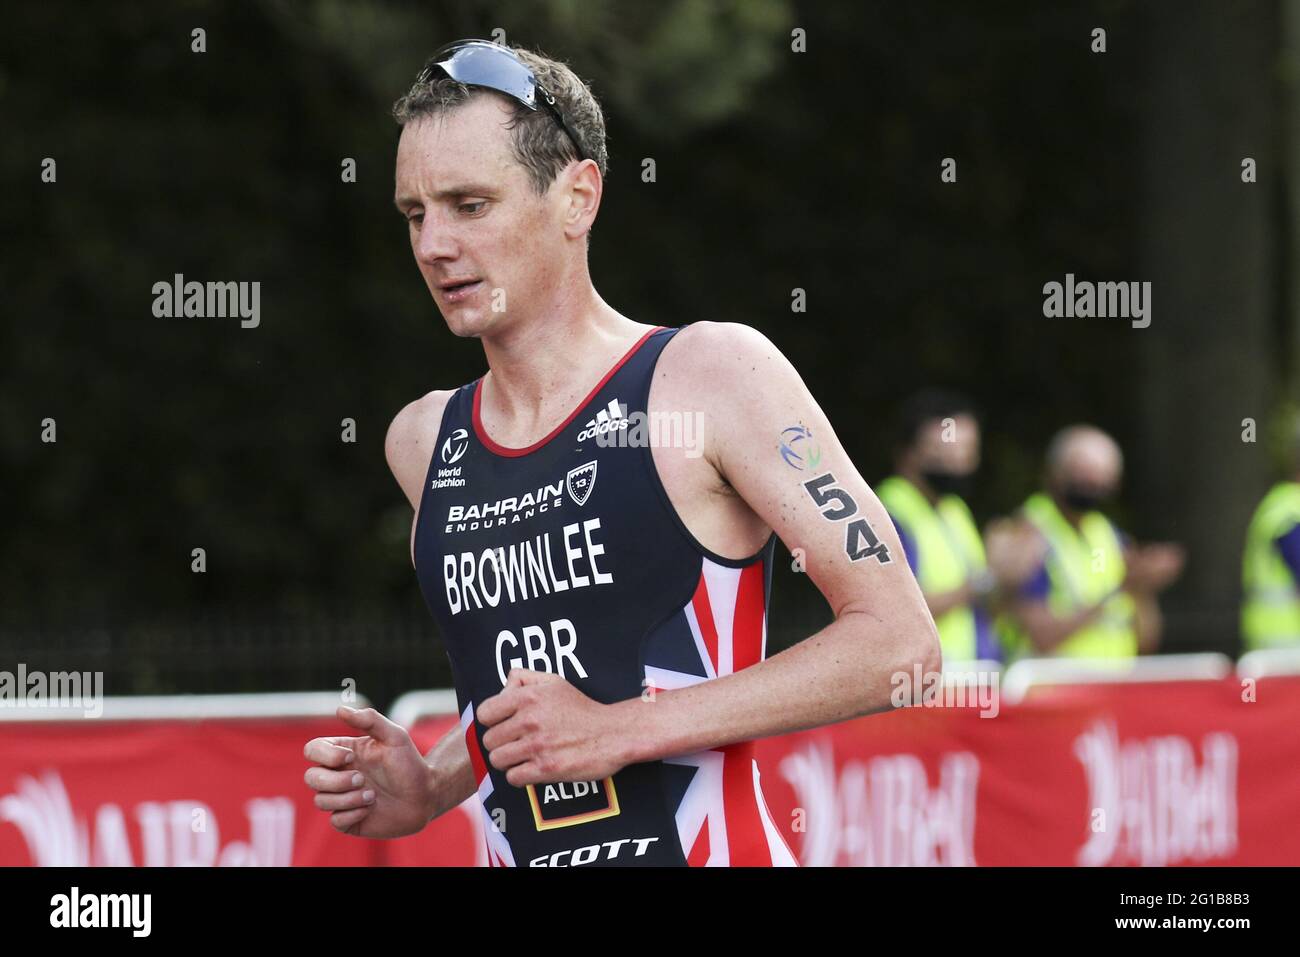 Leeds, UK. 06th June, 2021. Alistair Brownlee during the AJ Bell 2021 World Triathlon Para Series in Roundhay Park, Leeds. Credit: SPP Sport Press Photo. /Alamy Live News Stock Photo